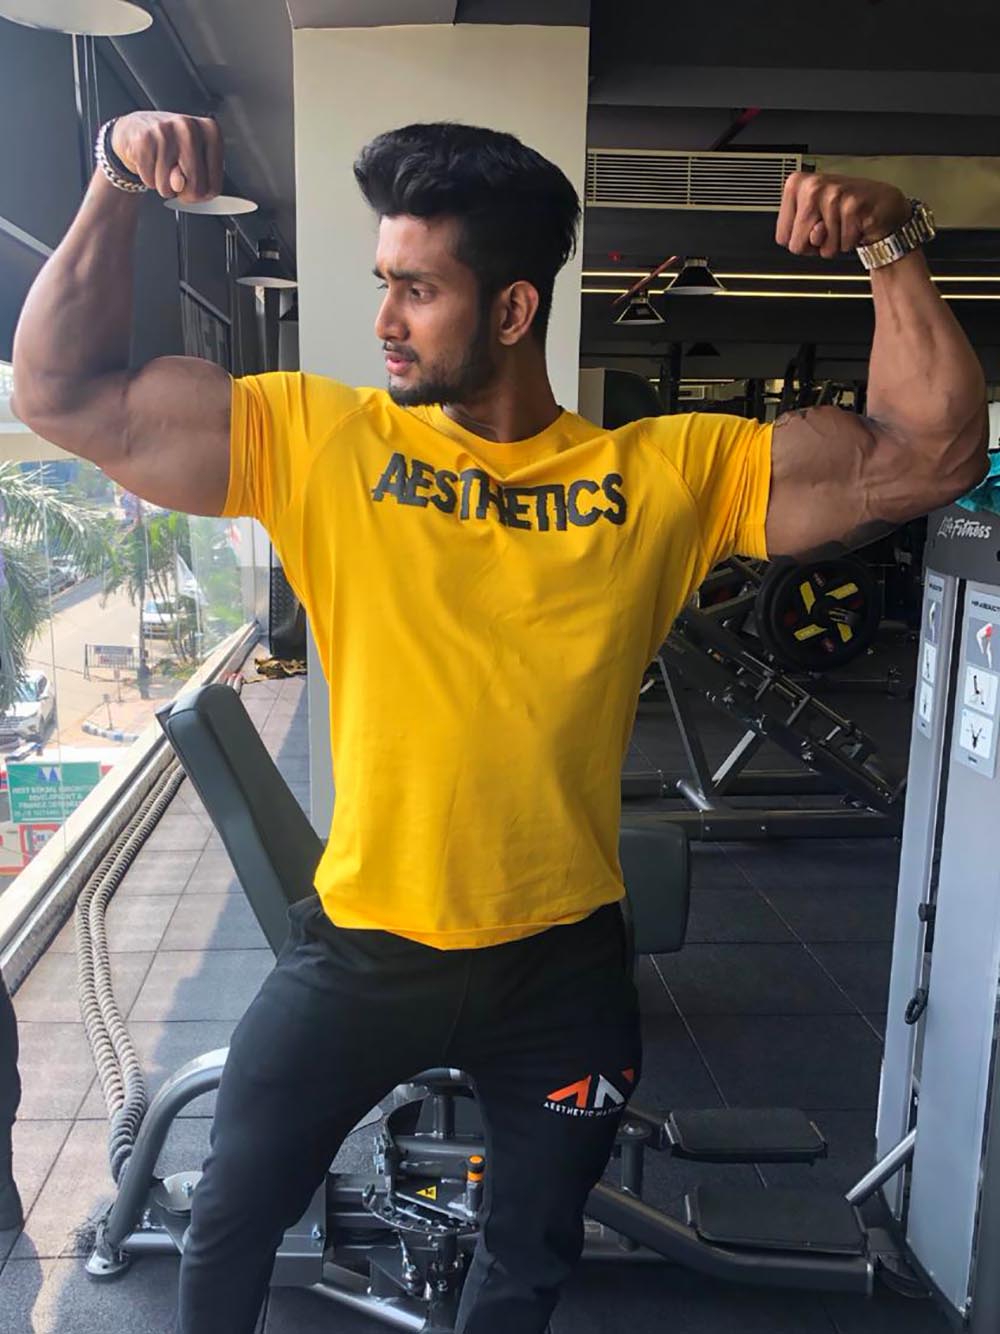 Buy Gym t shirt for men & workout t shirt online in India [[400+